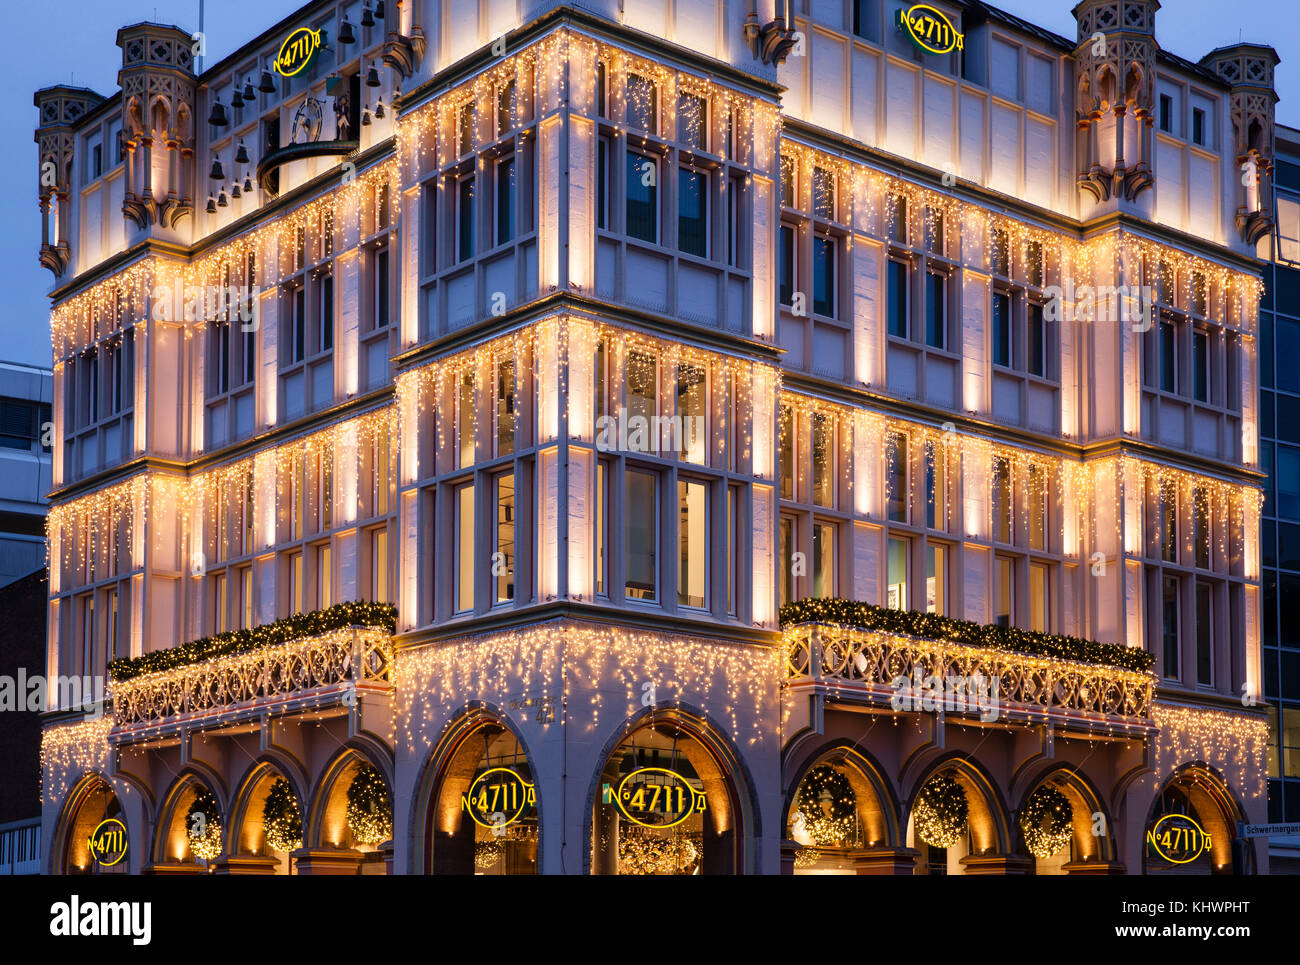 Germany, Cologne, the 4711 house at the Glockengasse, ancestral home of the perfume factory Muelhens, illumination during christmas time.  Deutschland Stock Photo